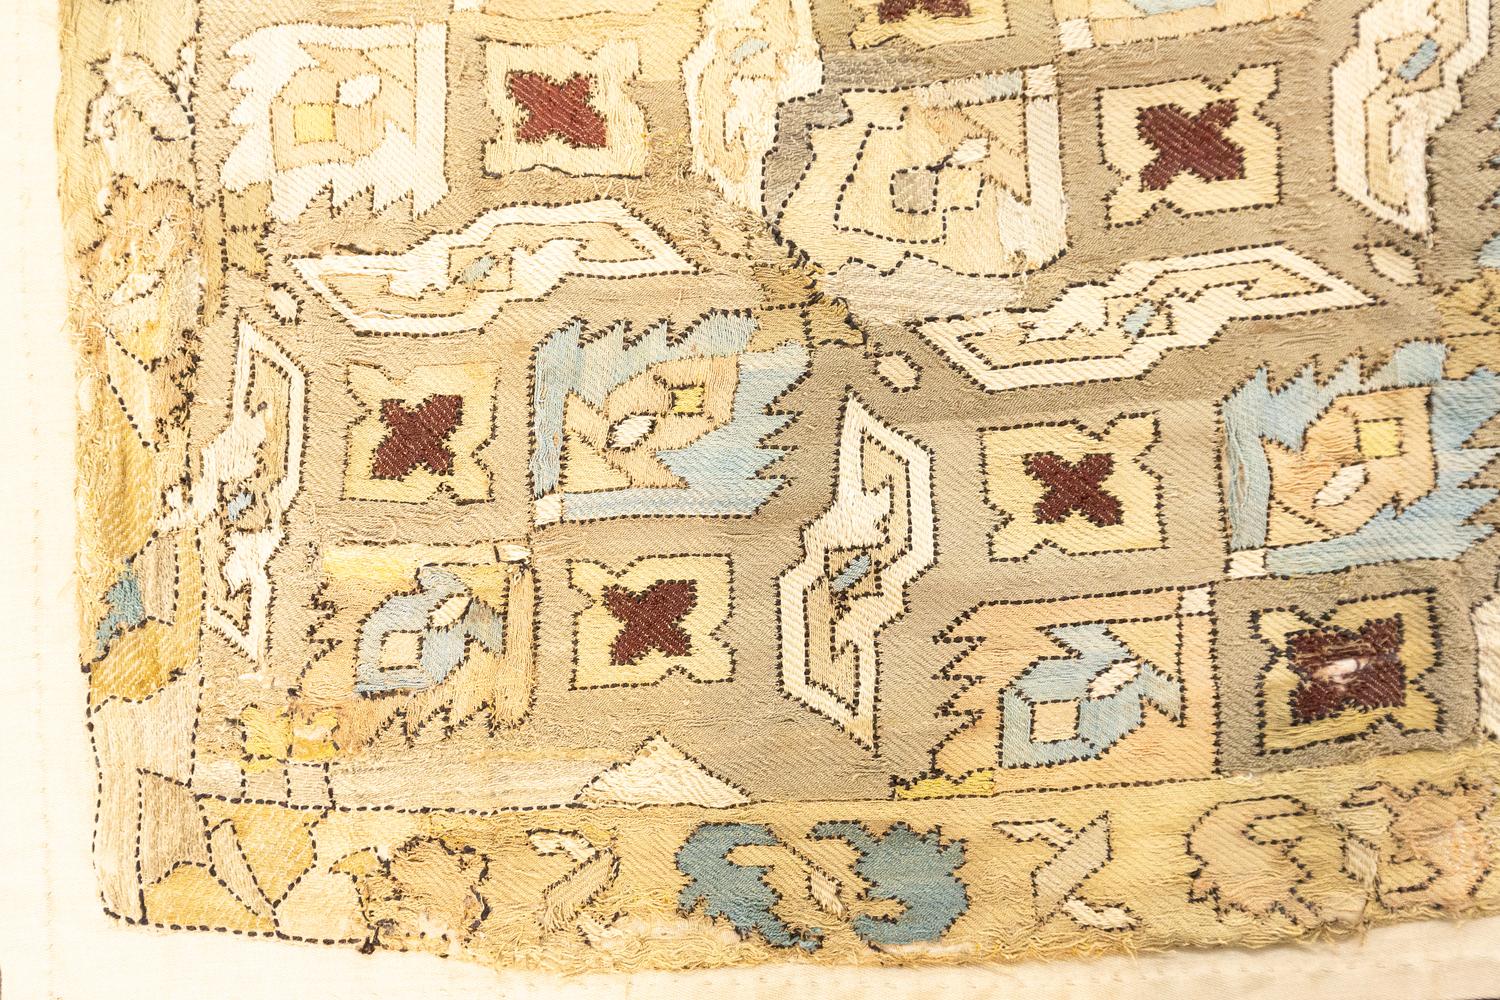 This is an antique silk Azerbaijan embroidery woven during the 18th century and measures 76 x 74CM in size. It has an all-over highly geometric floral design with muted pastel colors. It has a single border that follows the field’s color palette and